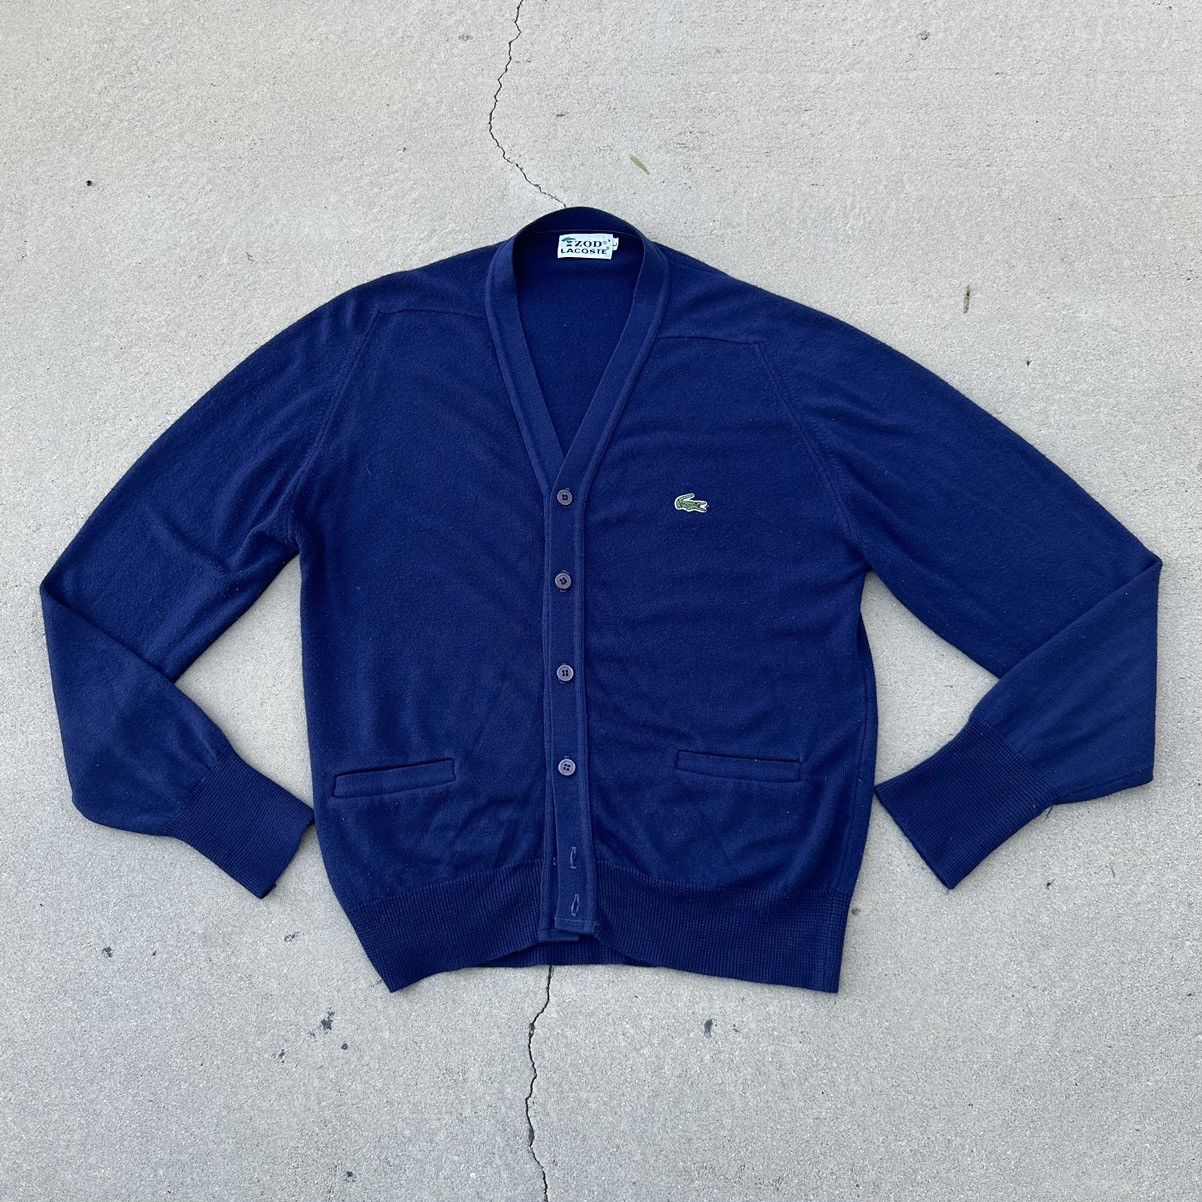 Pre-owned Cardigan X Lacoste 80's Vintage Lacoste Navy Blue Cashmere Cardigan